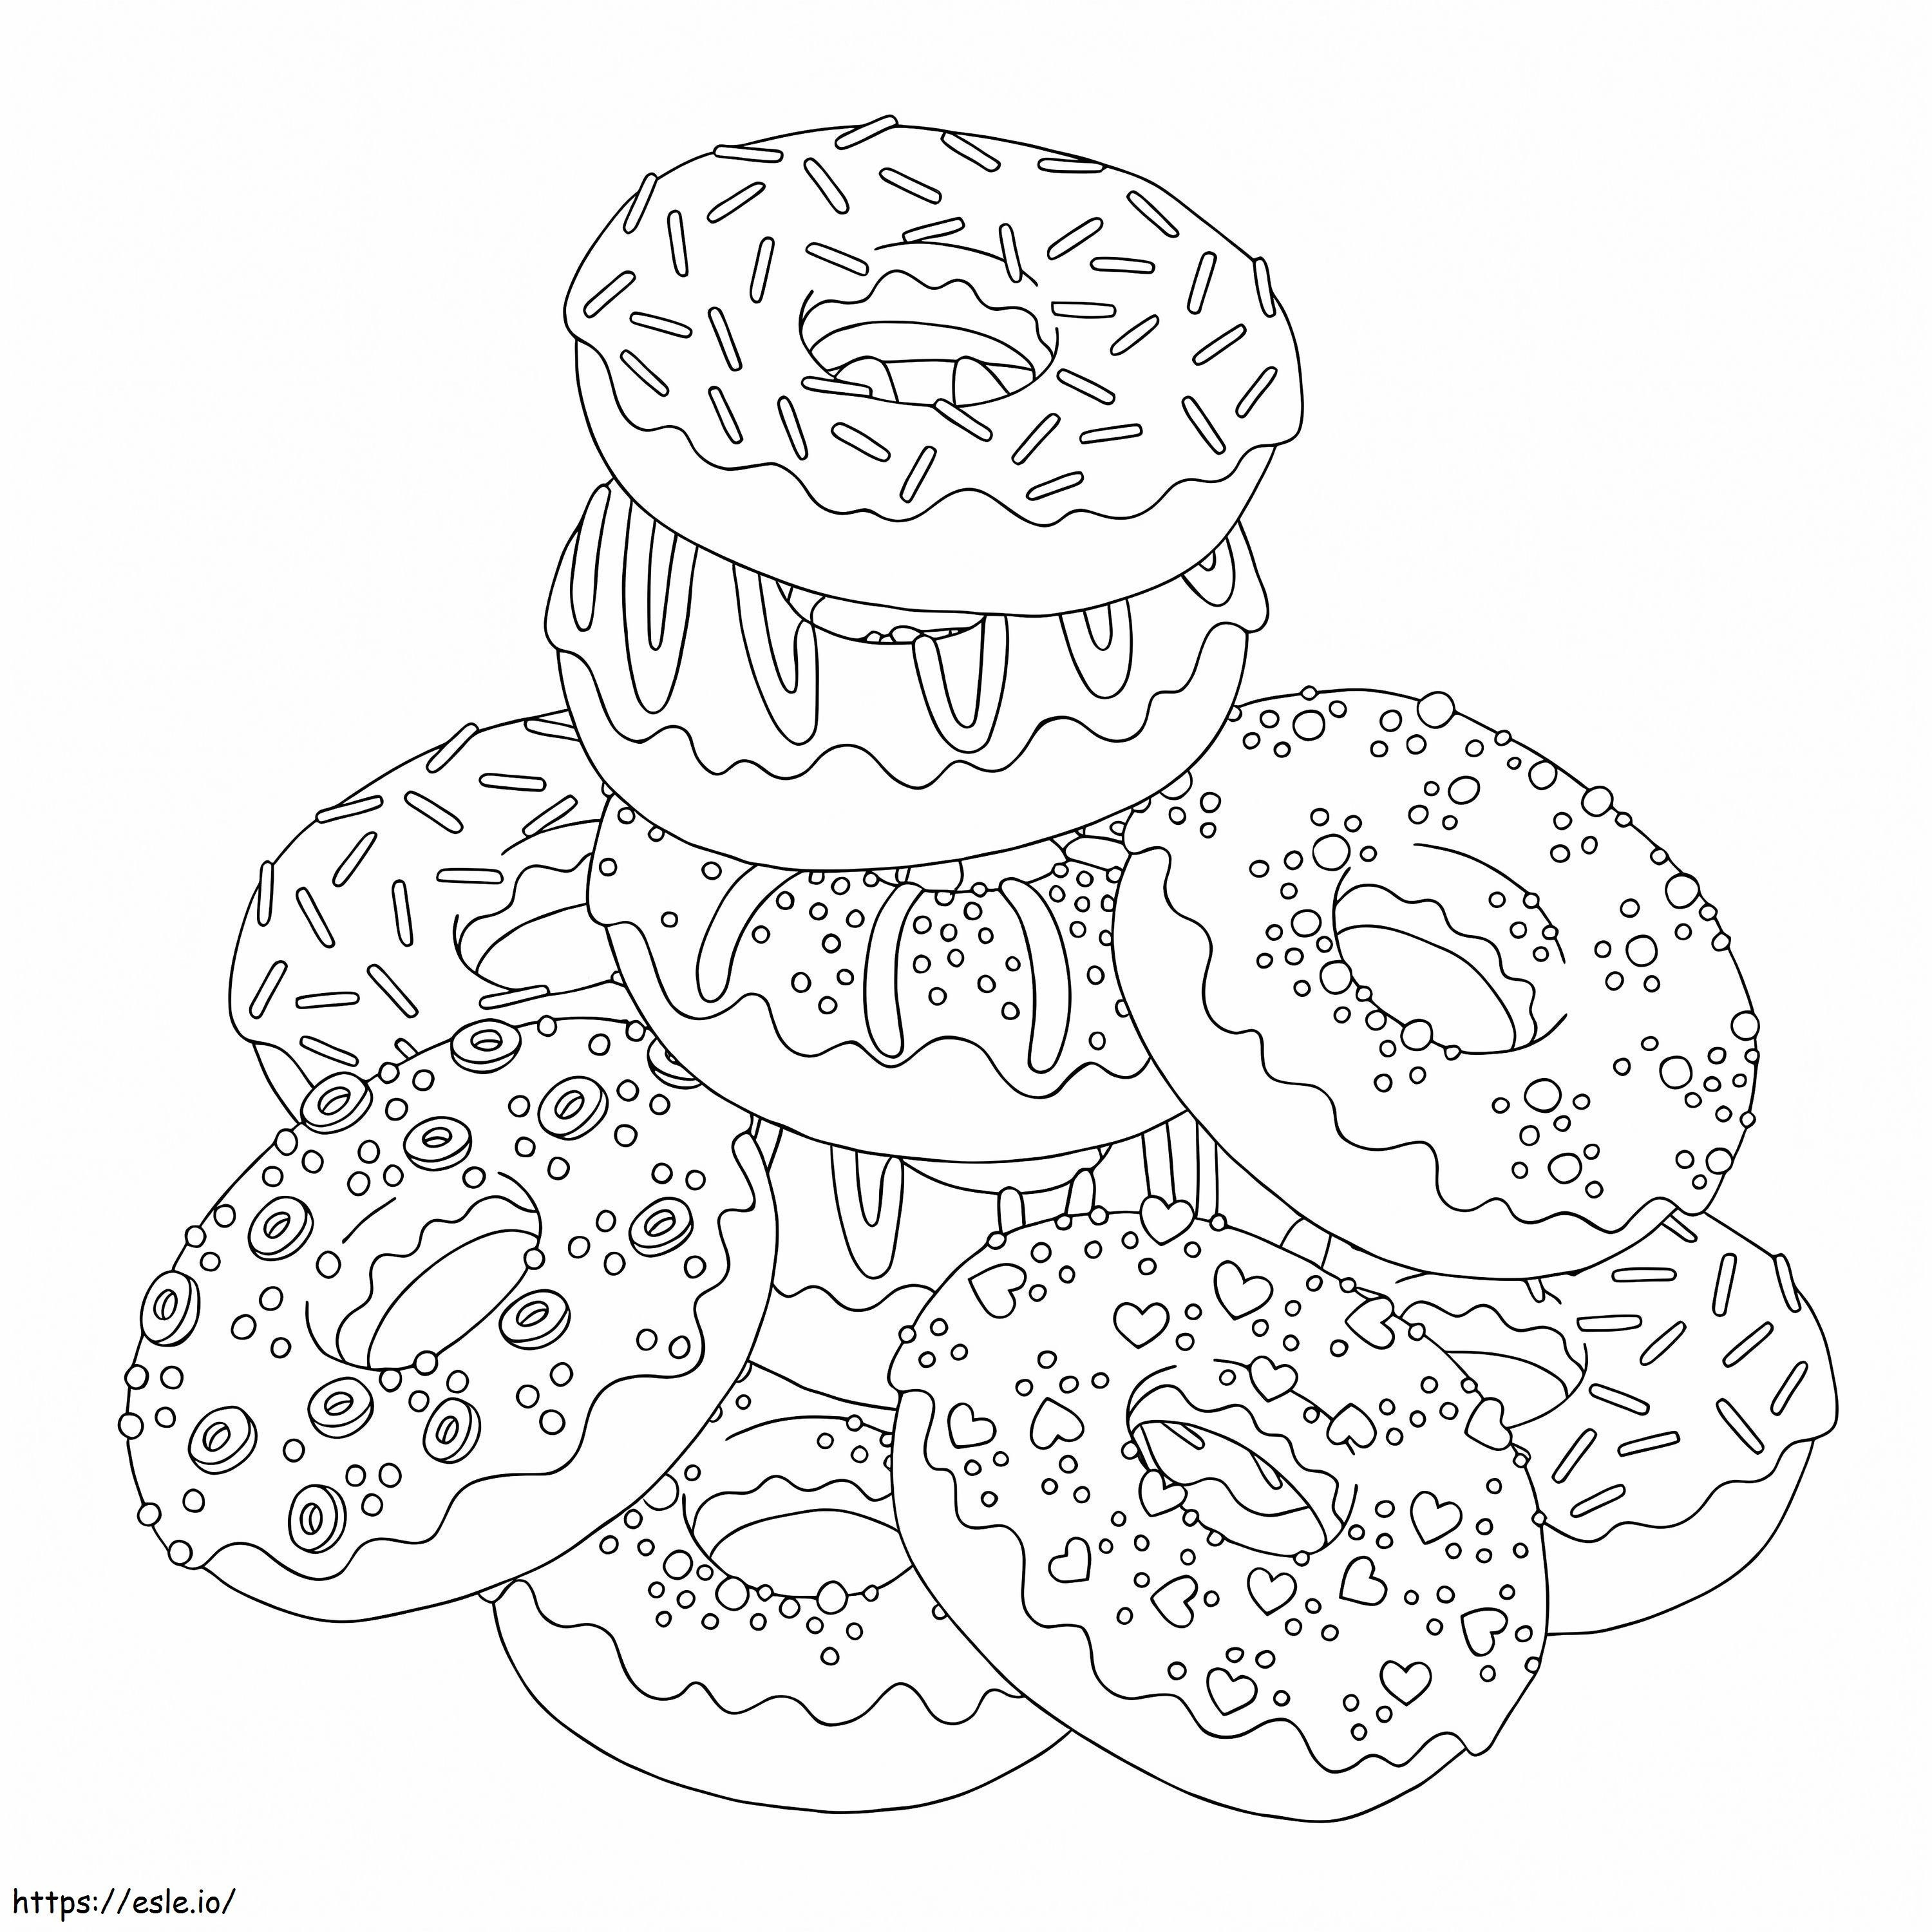 Rosquillas coloring page